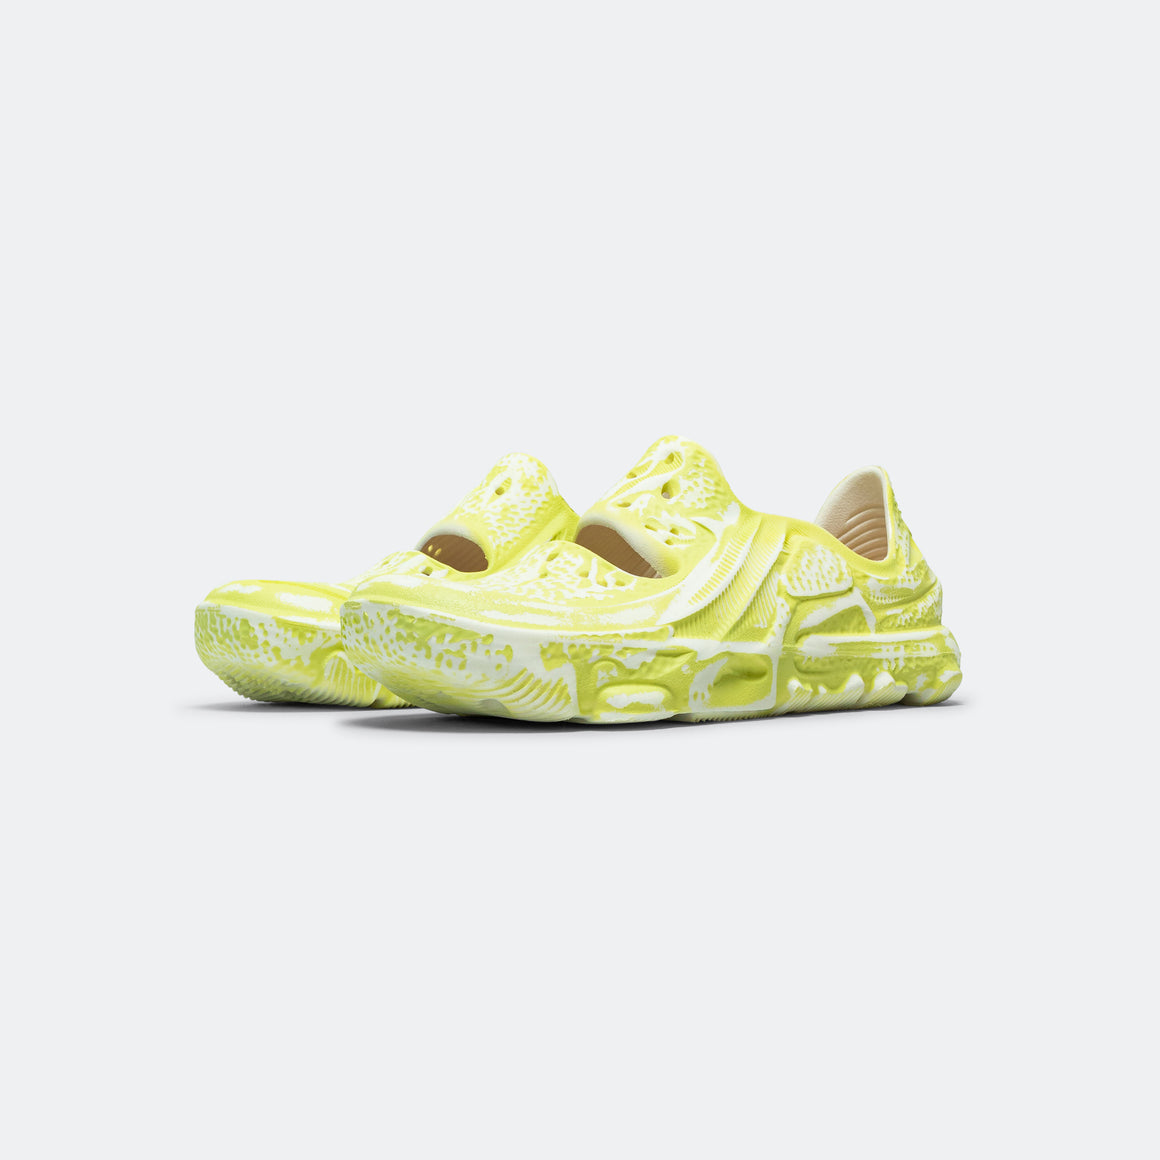 Nike - ISPA Universal - Natural/Limelight - UP THERE